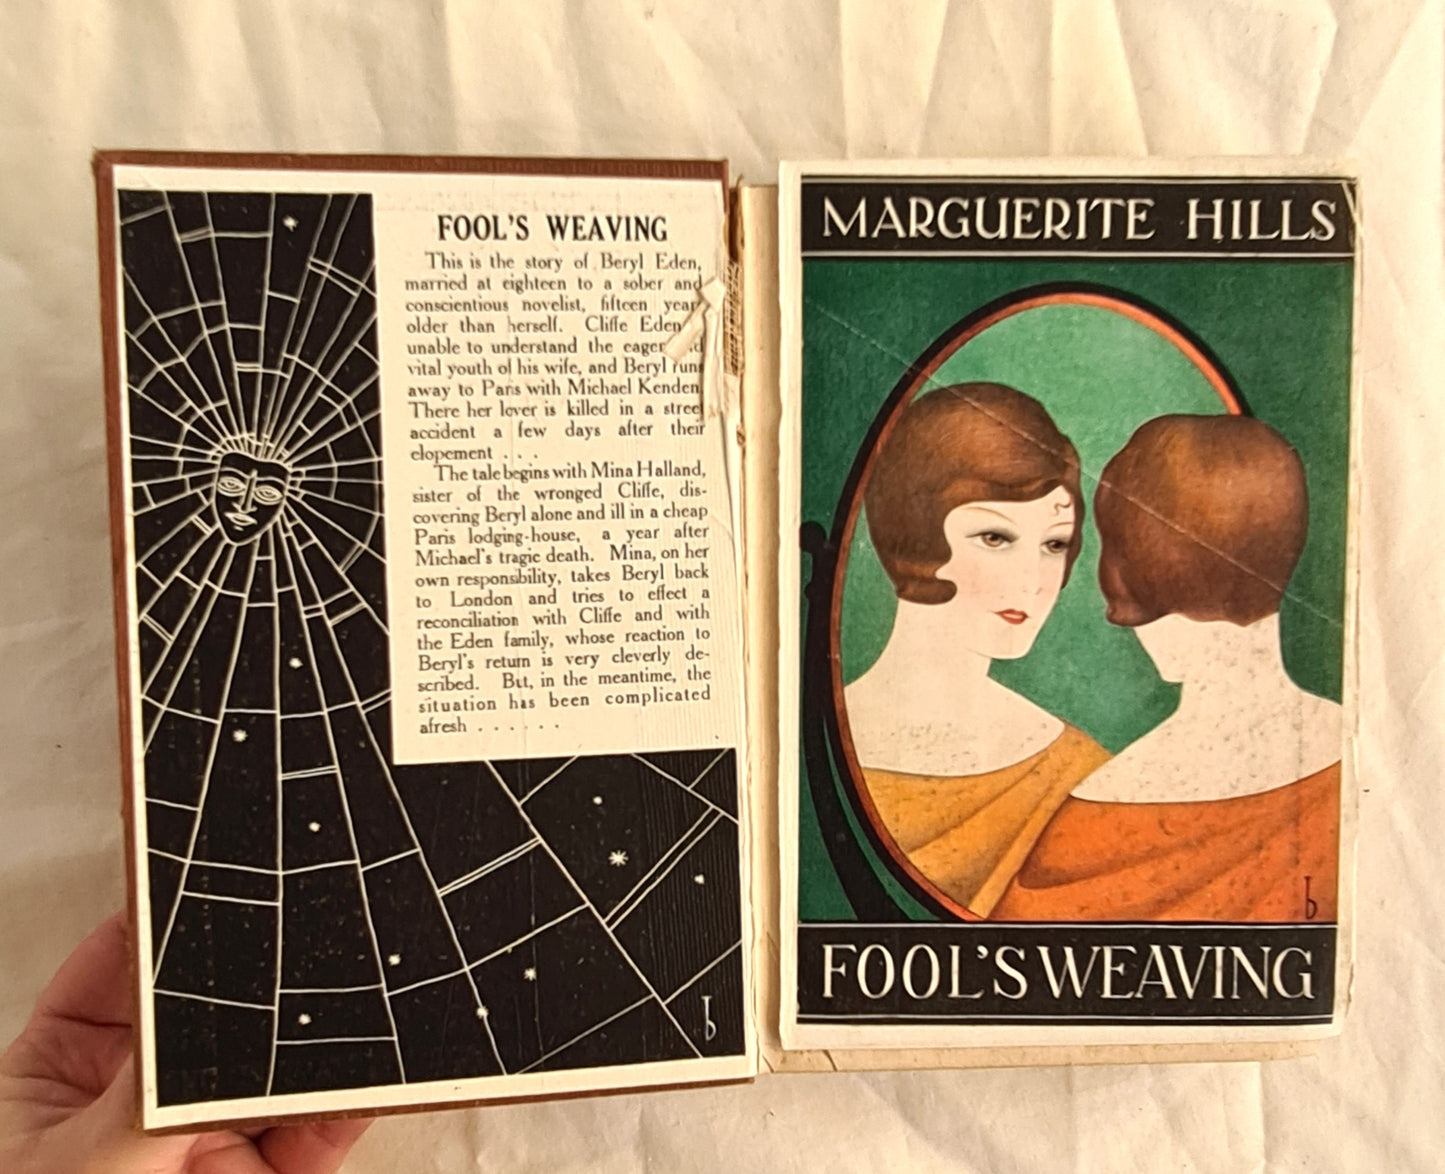 Fool’s Weaving by Marguerite Hills